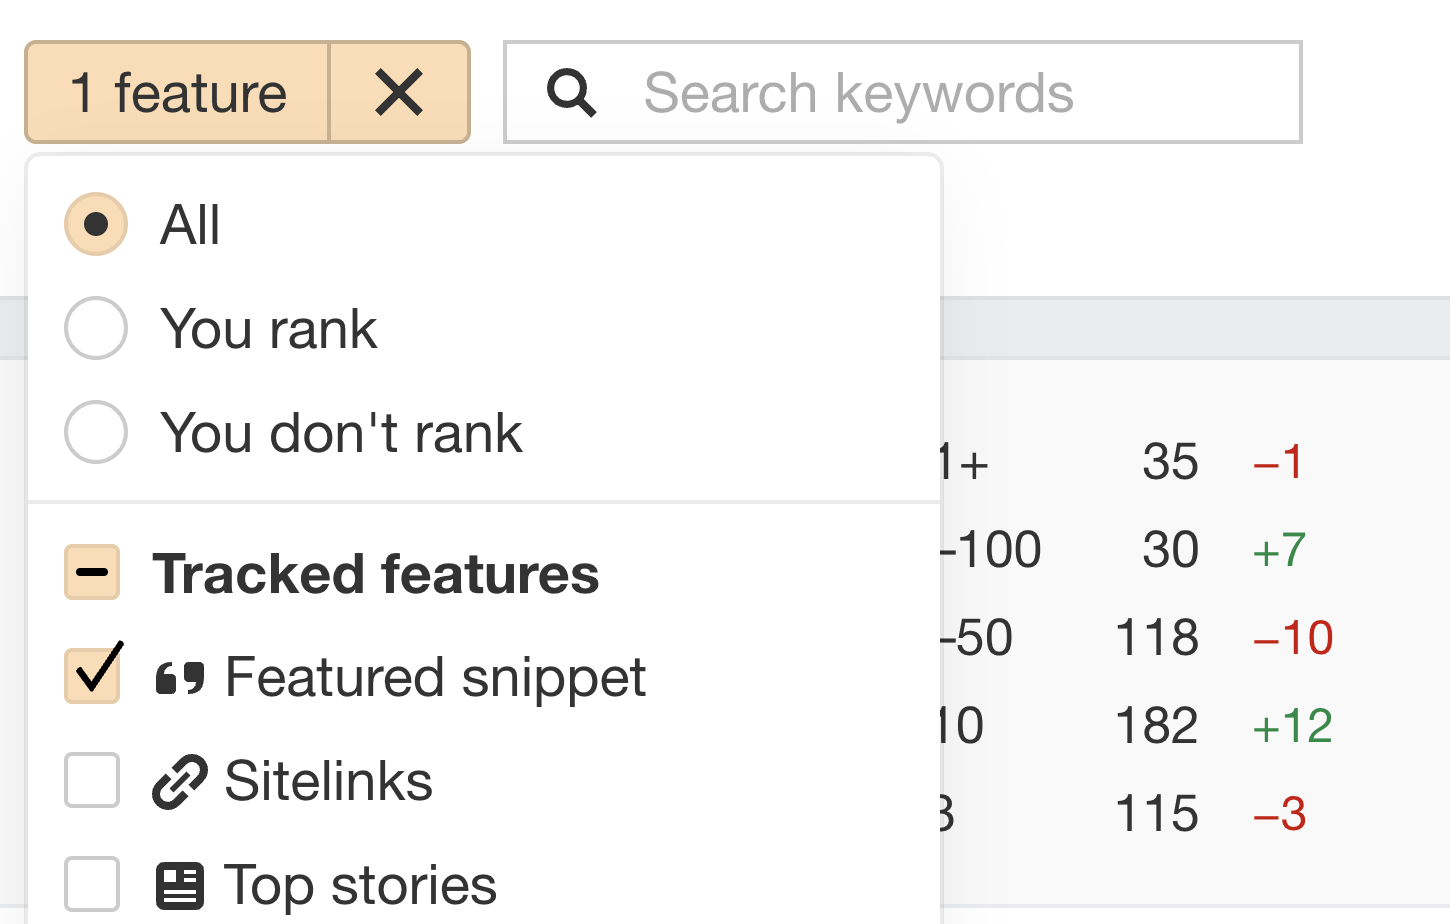 Filtering for keywords that only trigger featured snippets